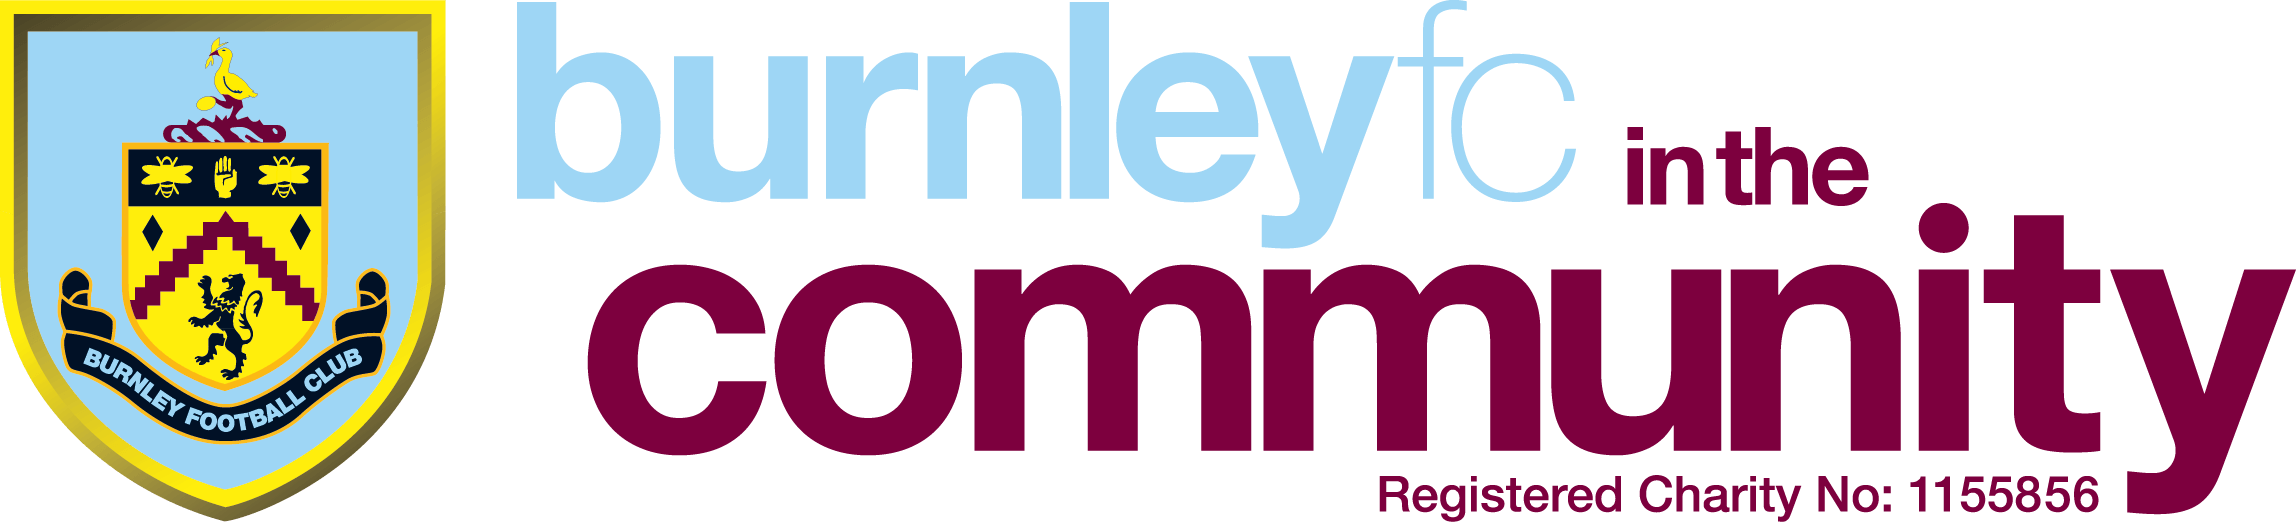 Burnley Logo - Burnley FC in the Community, the Official charity of Burnley FC